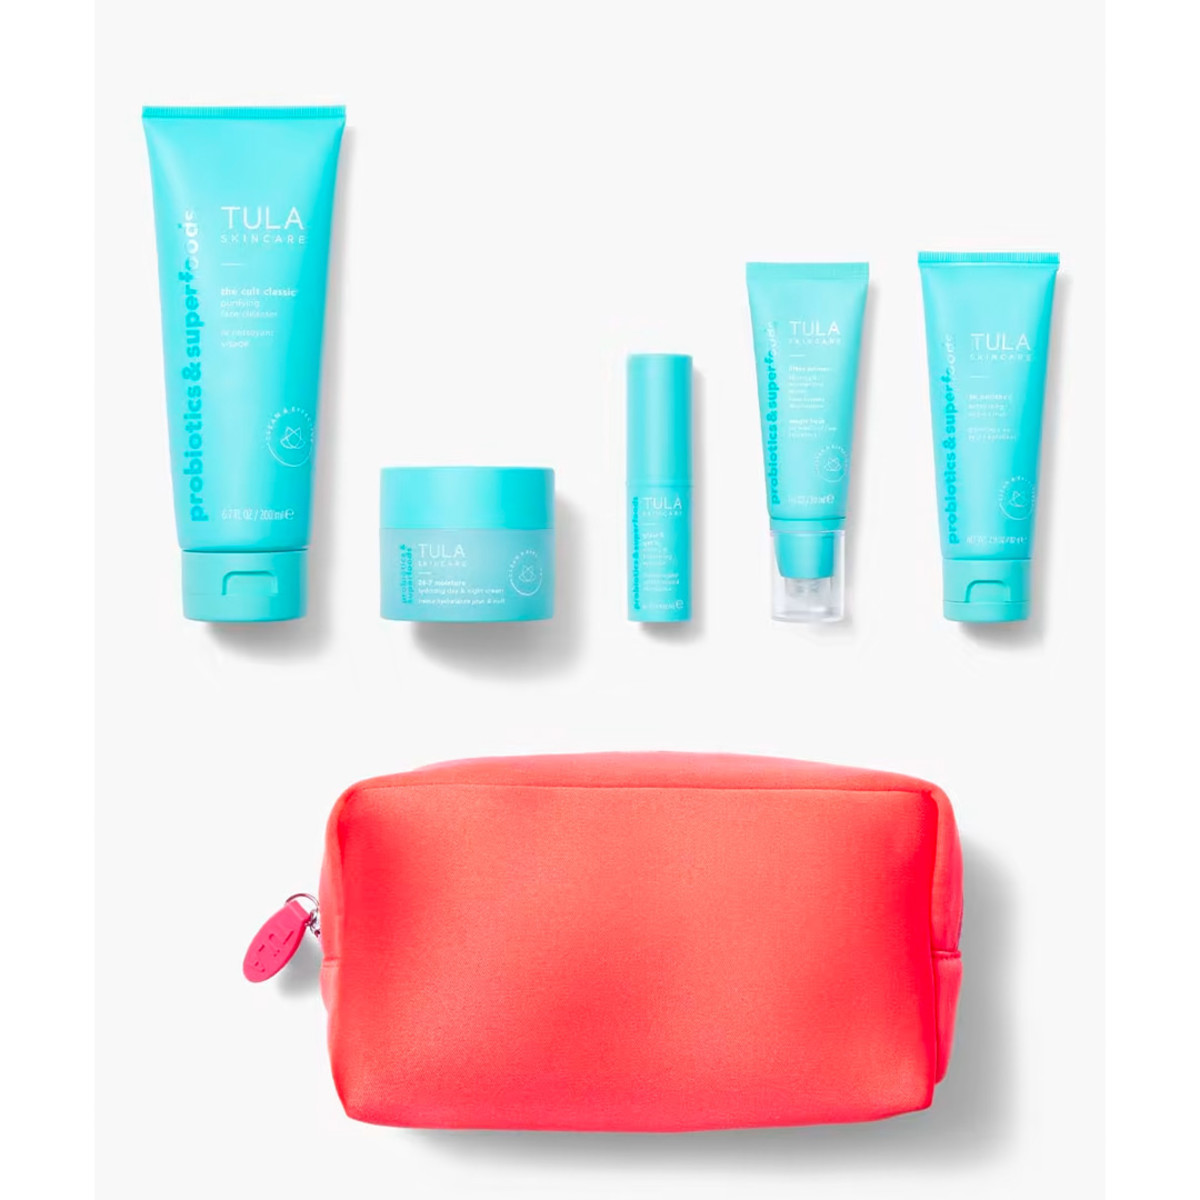 One of the best skincare gift sets for women who love all things beauty, the Tula Skincare Essentials Routine Kit available now at Tula